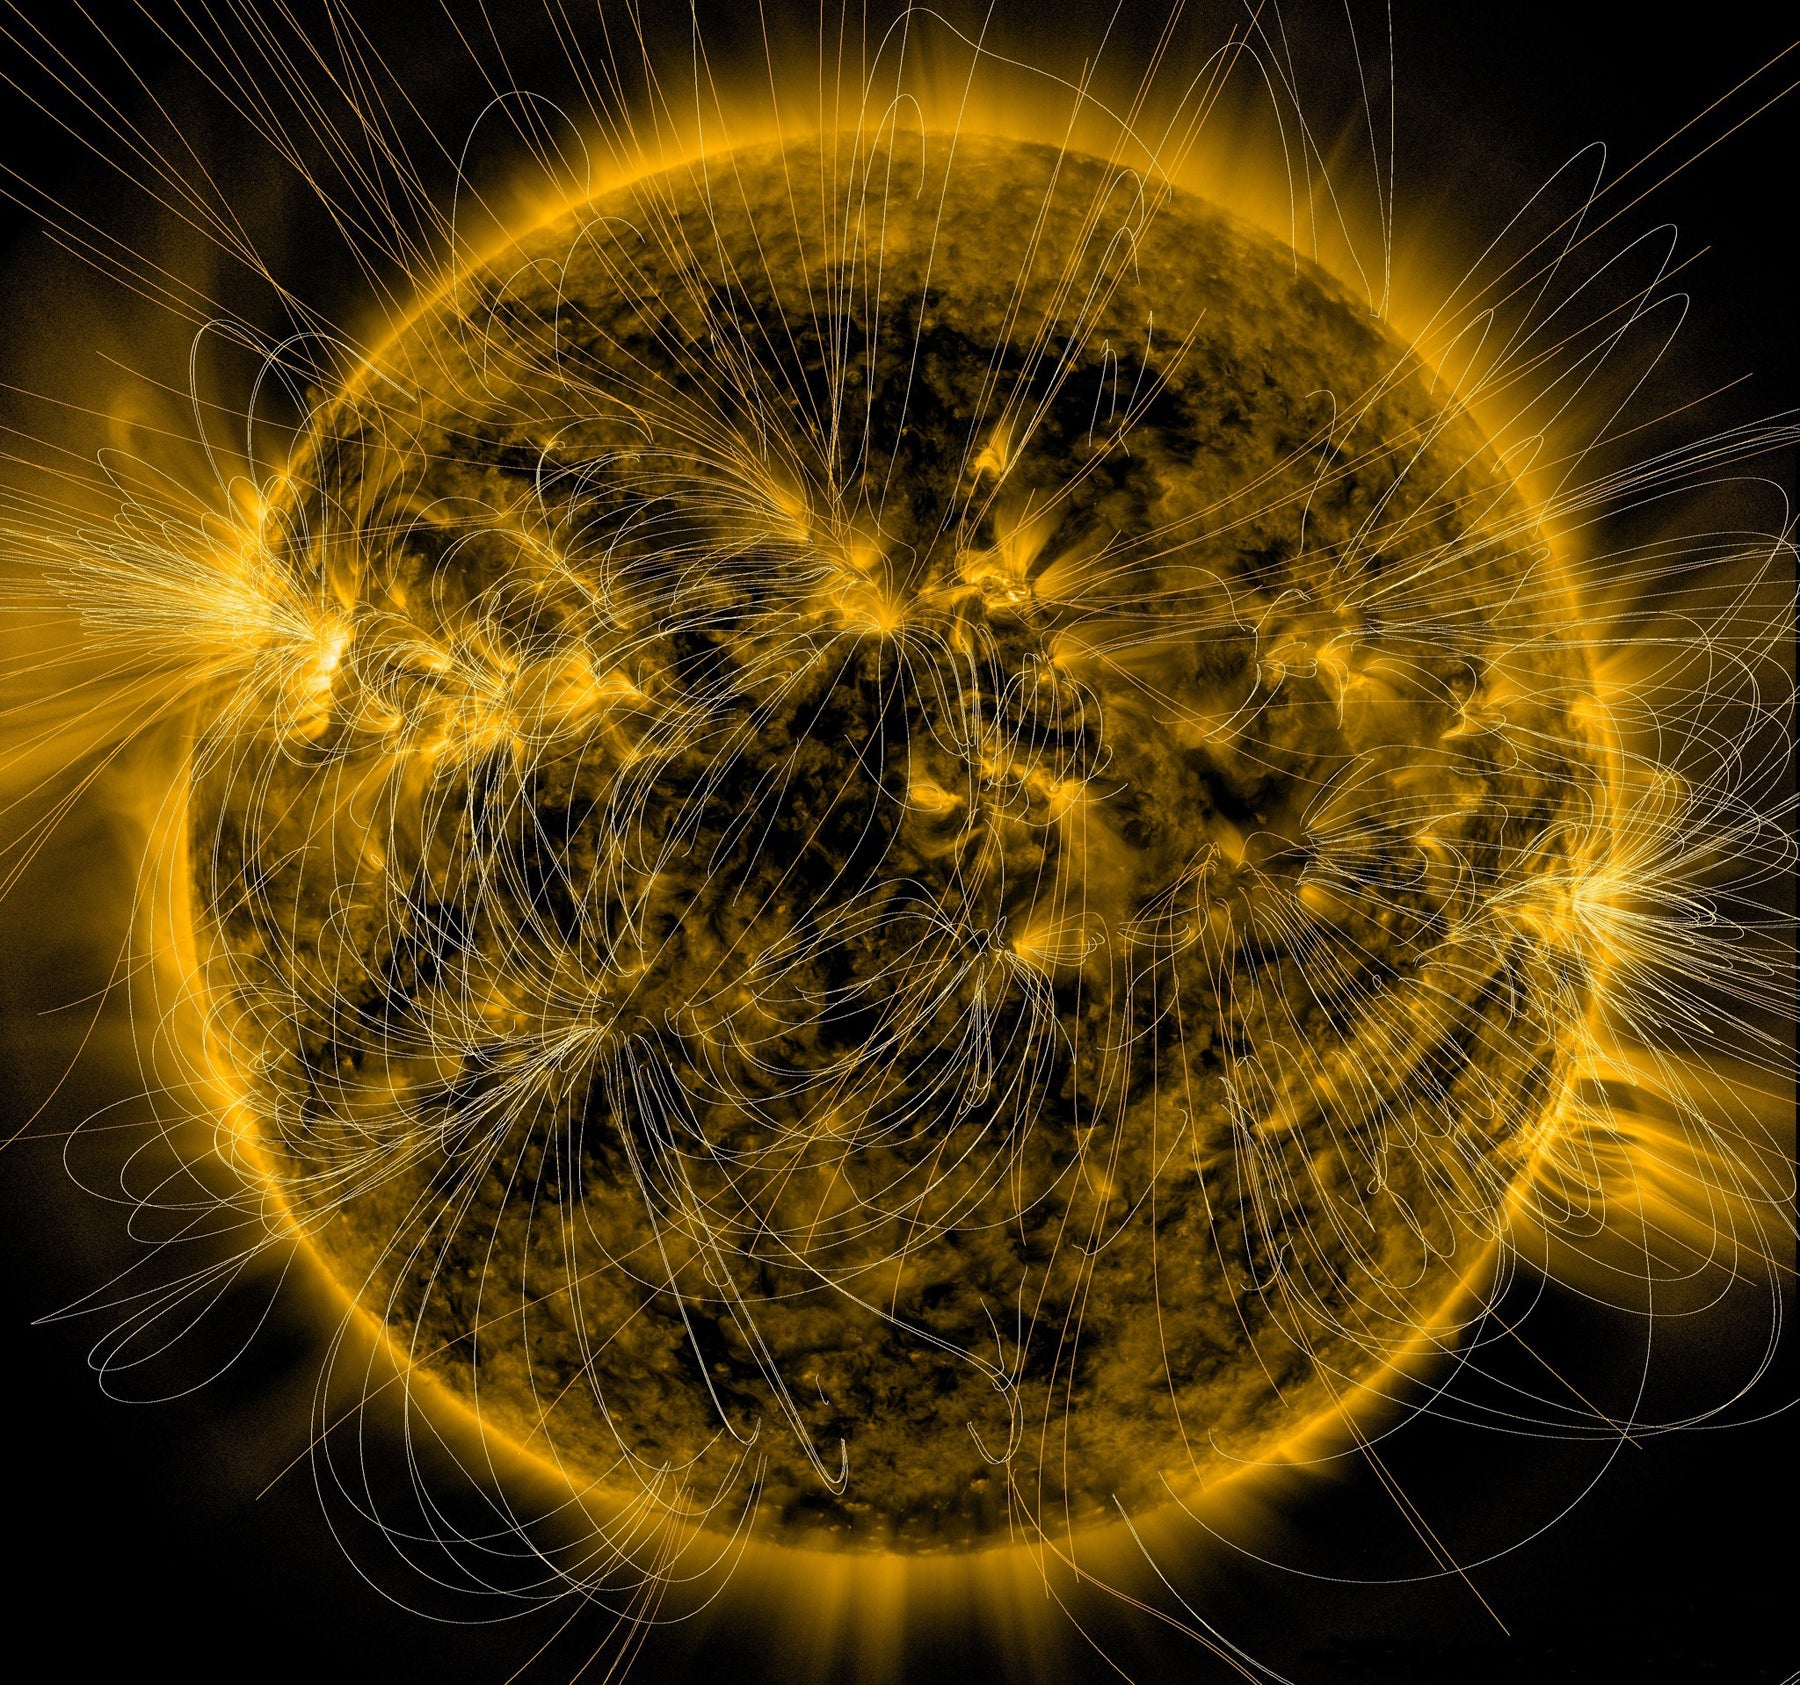 The Sun's Magnetic Poles Are Vanishing